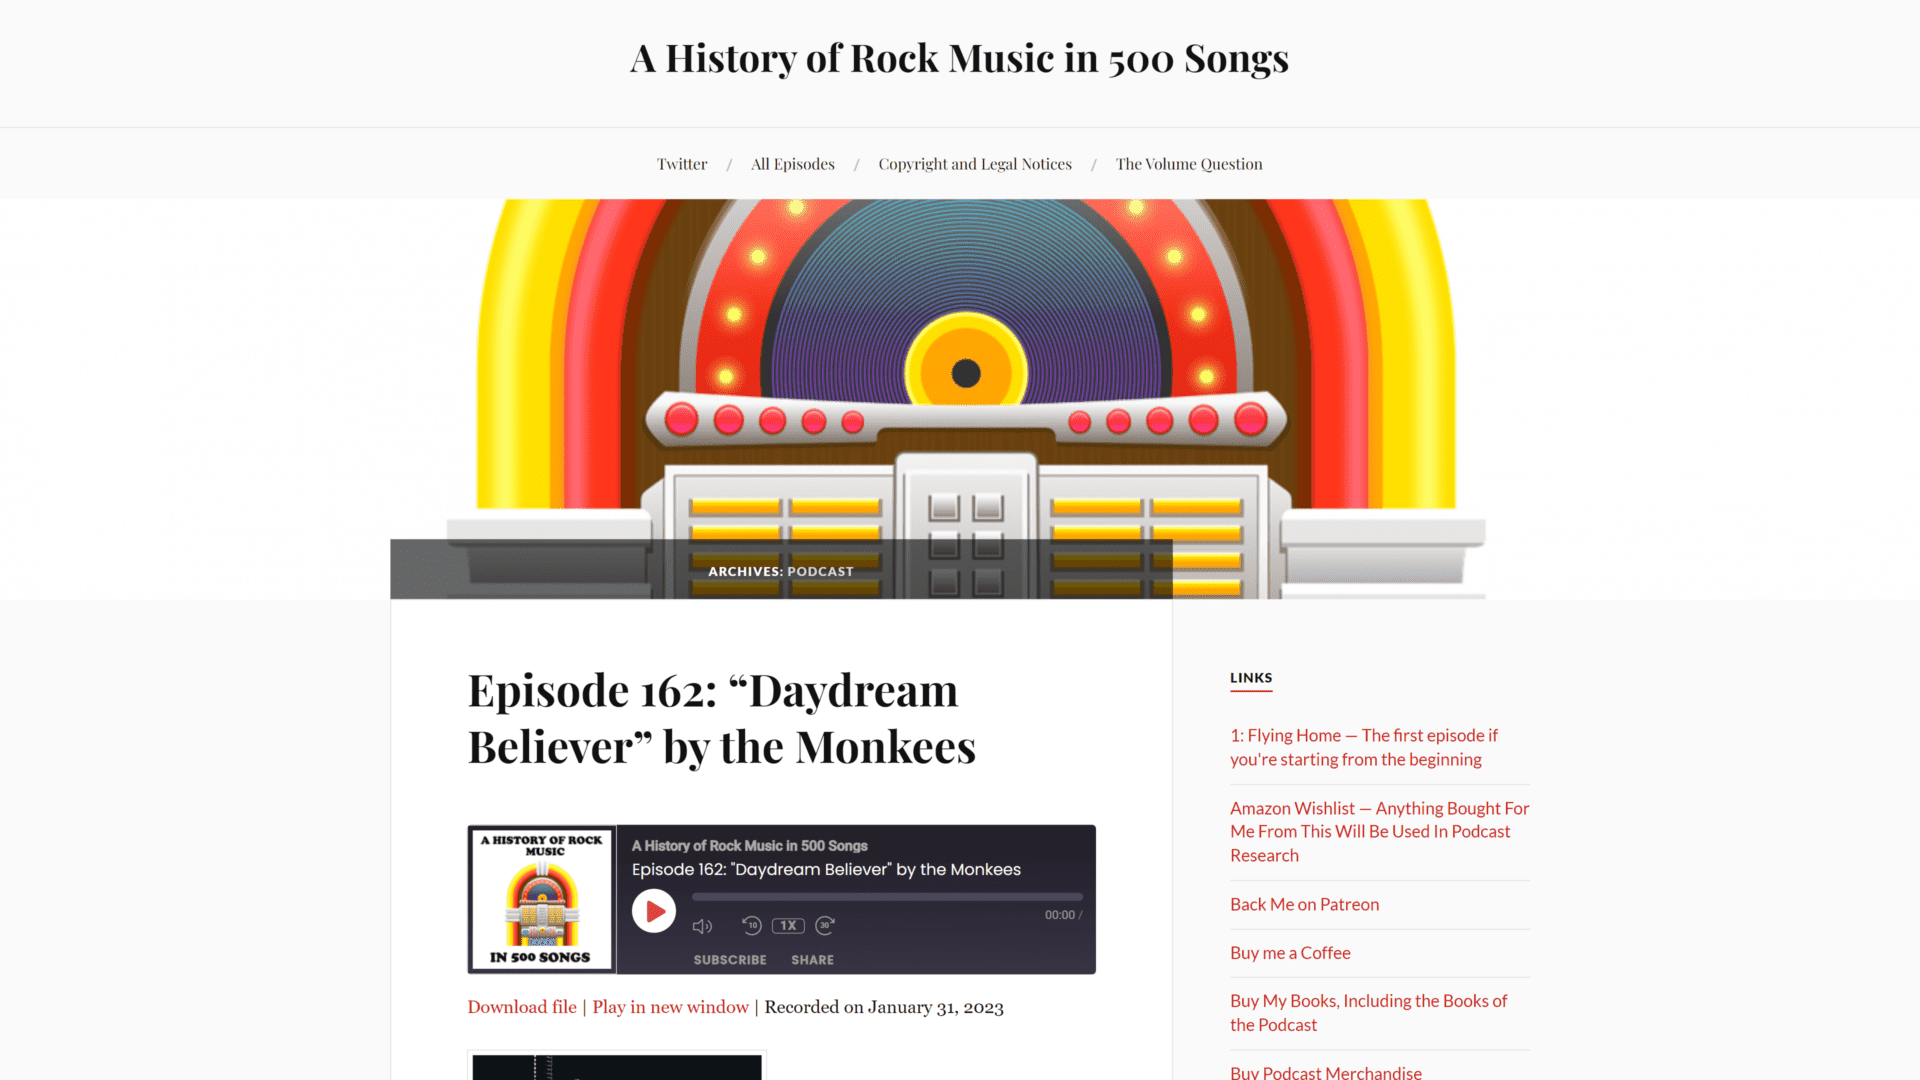 A screenshot of a history of rock music in 500 songs homepage